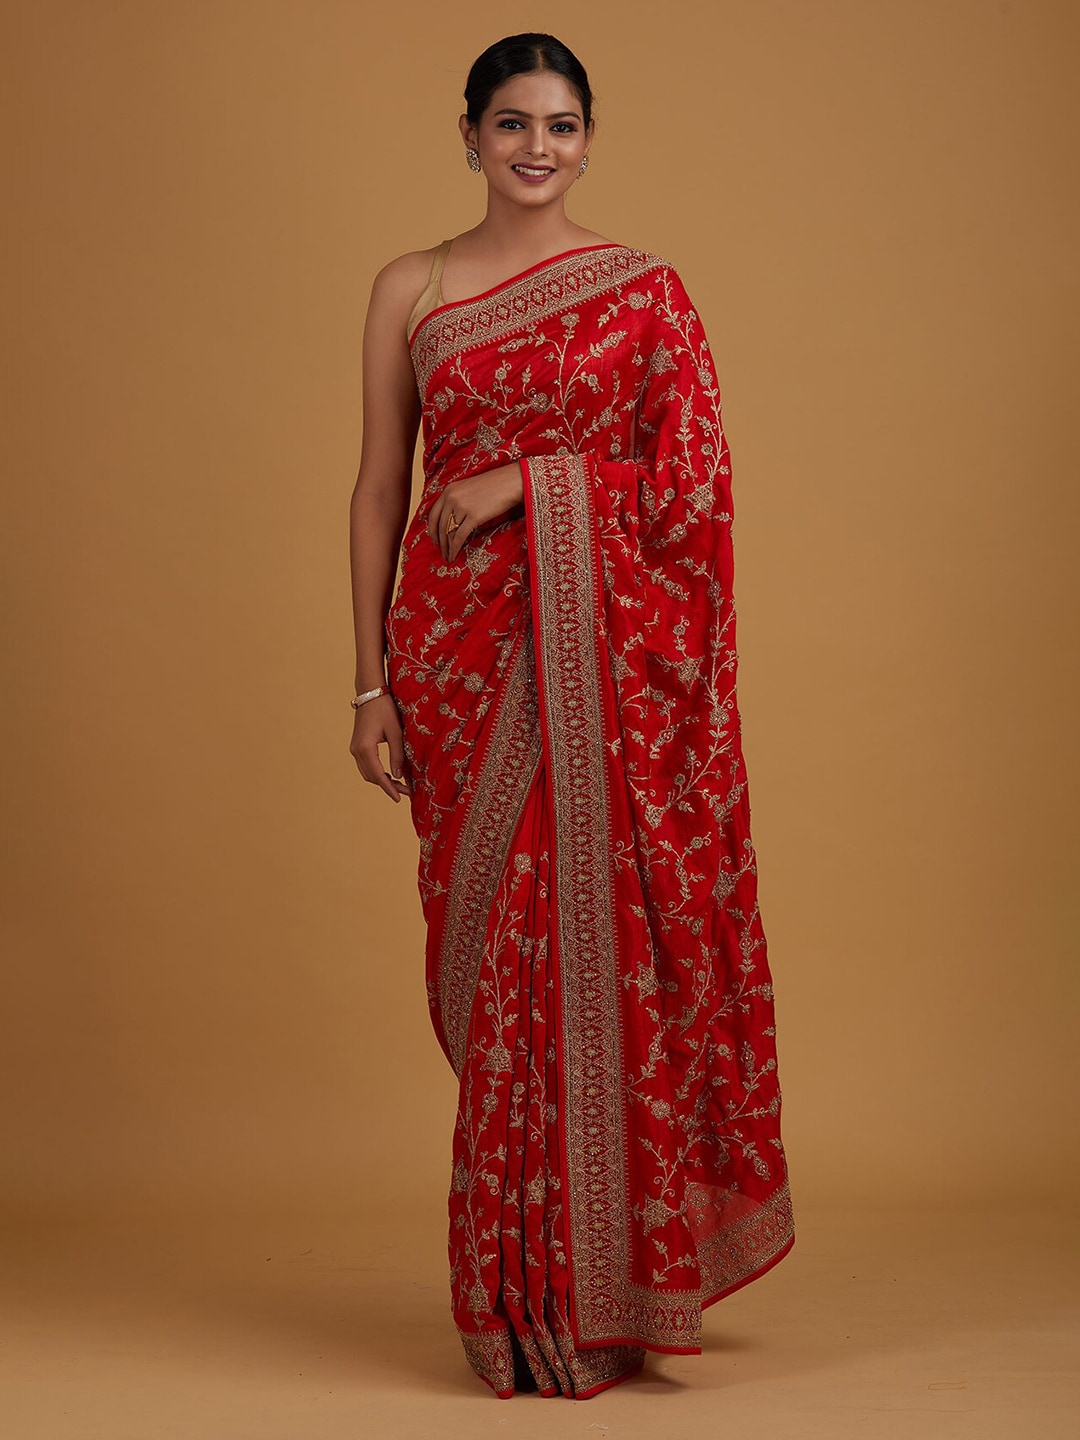 Koskii Red & Gold-Toned Floral Embroidered Art Silk Saree Price in India